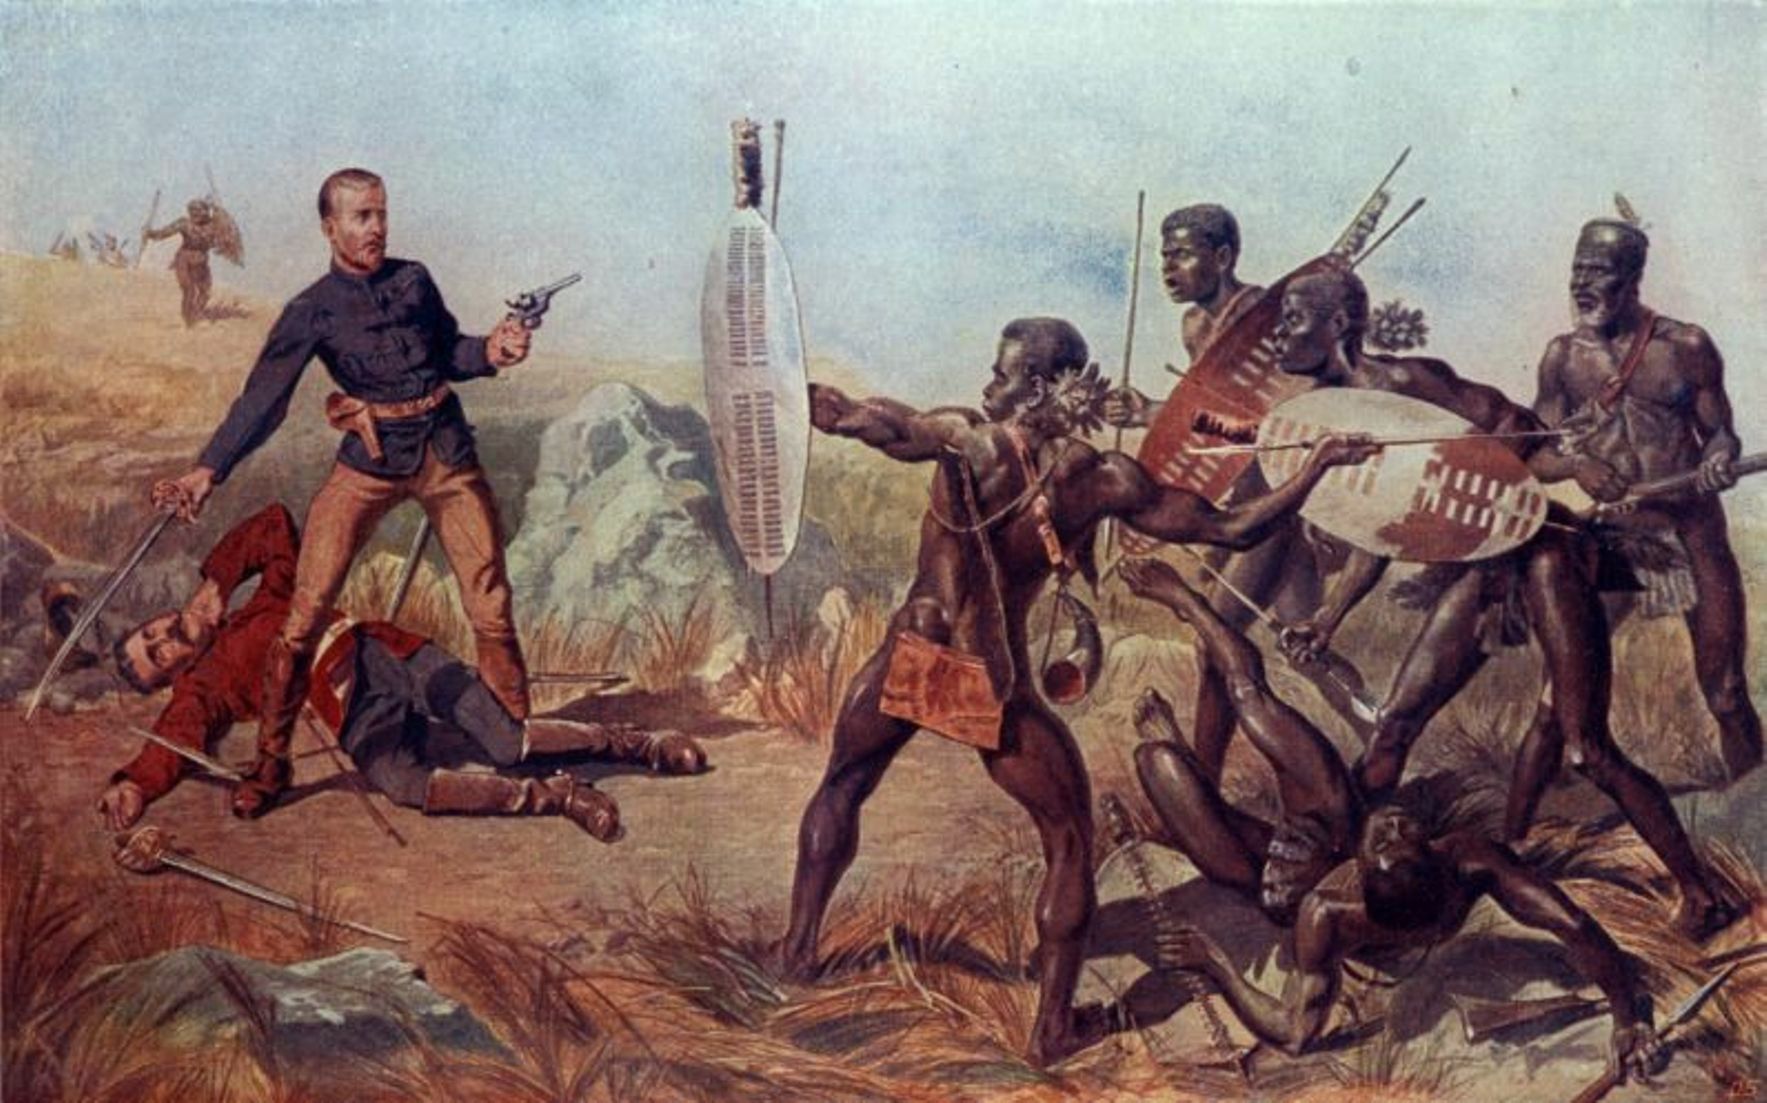 Painting of Zulu warriors in battle against European army using their short spears and rushign tactic to overwhelm the better armed soldiers